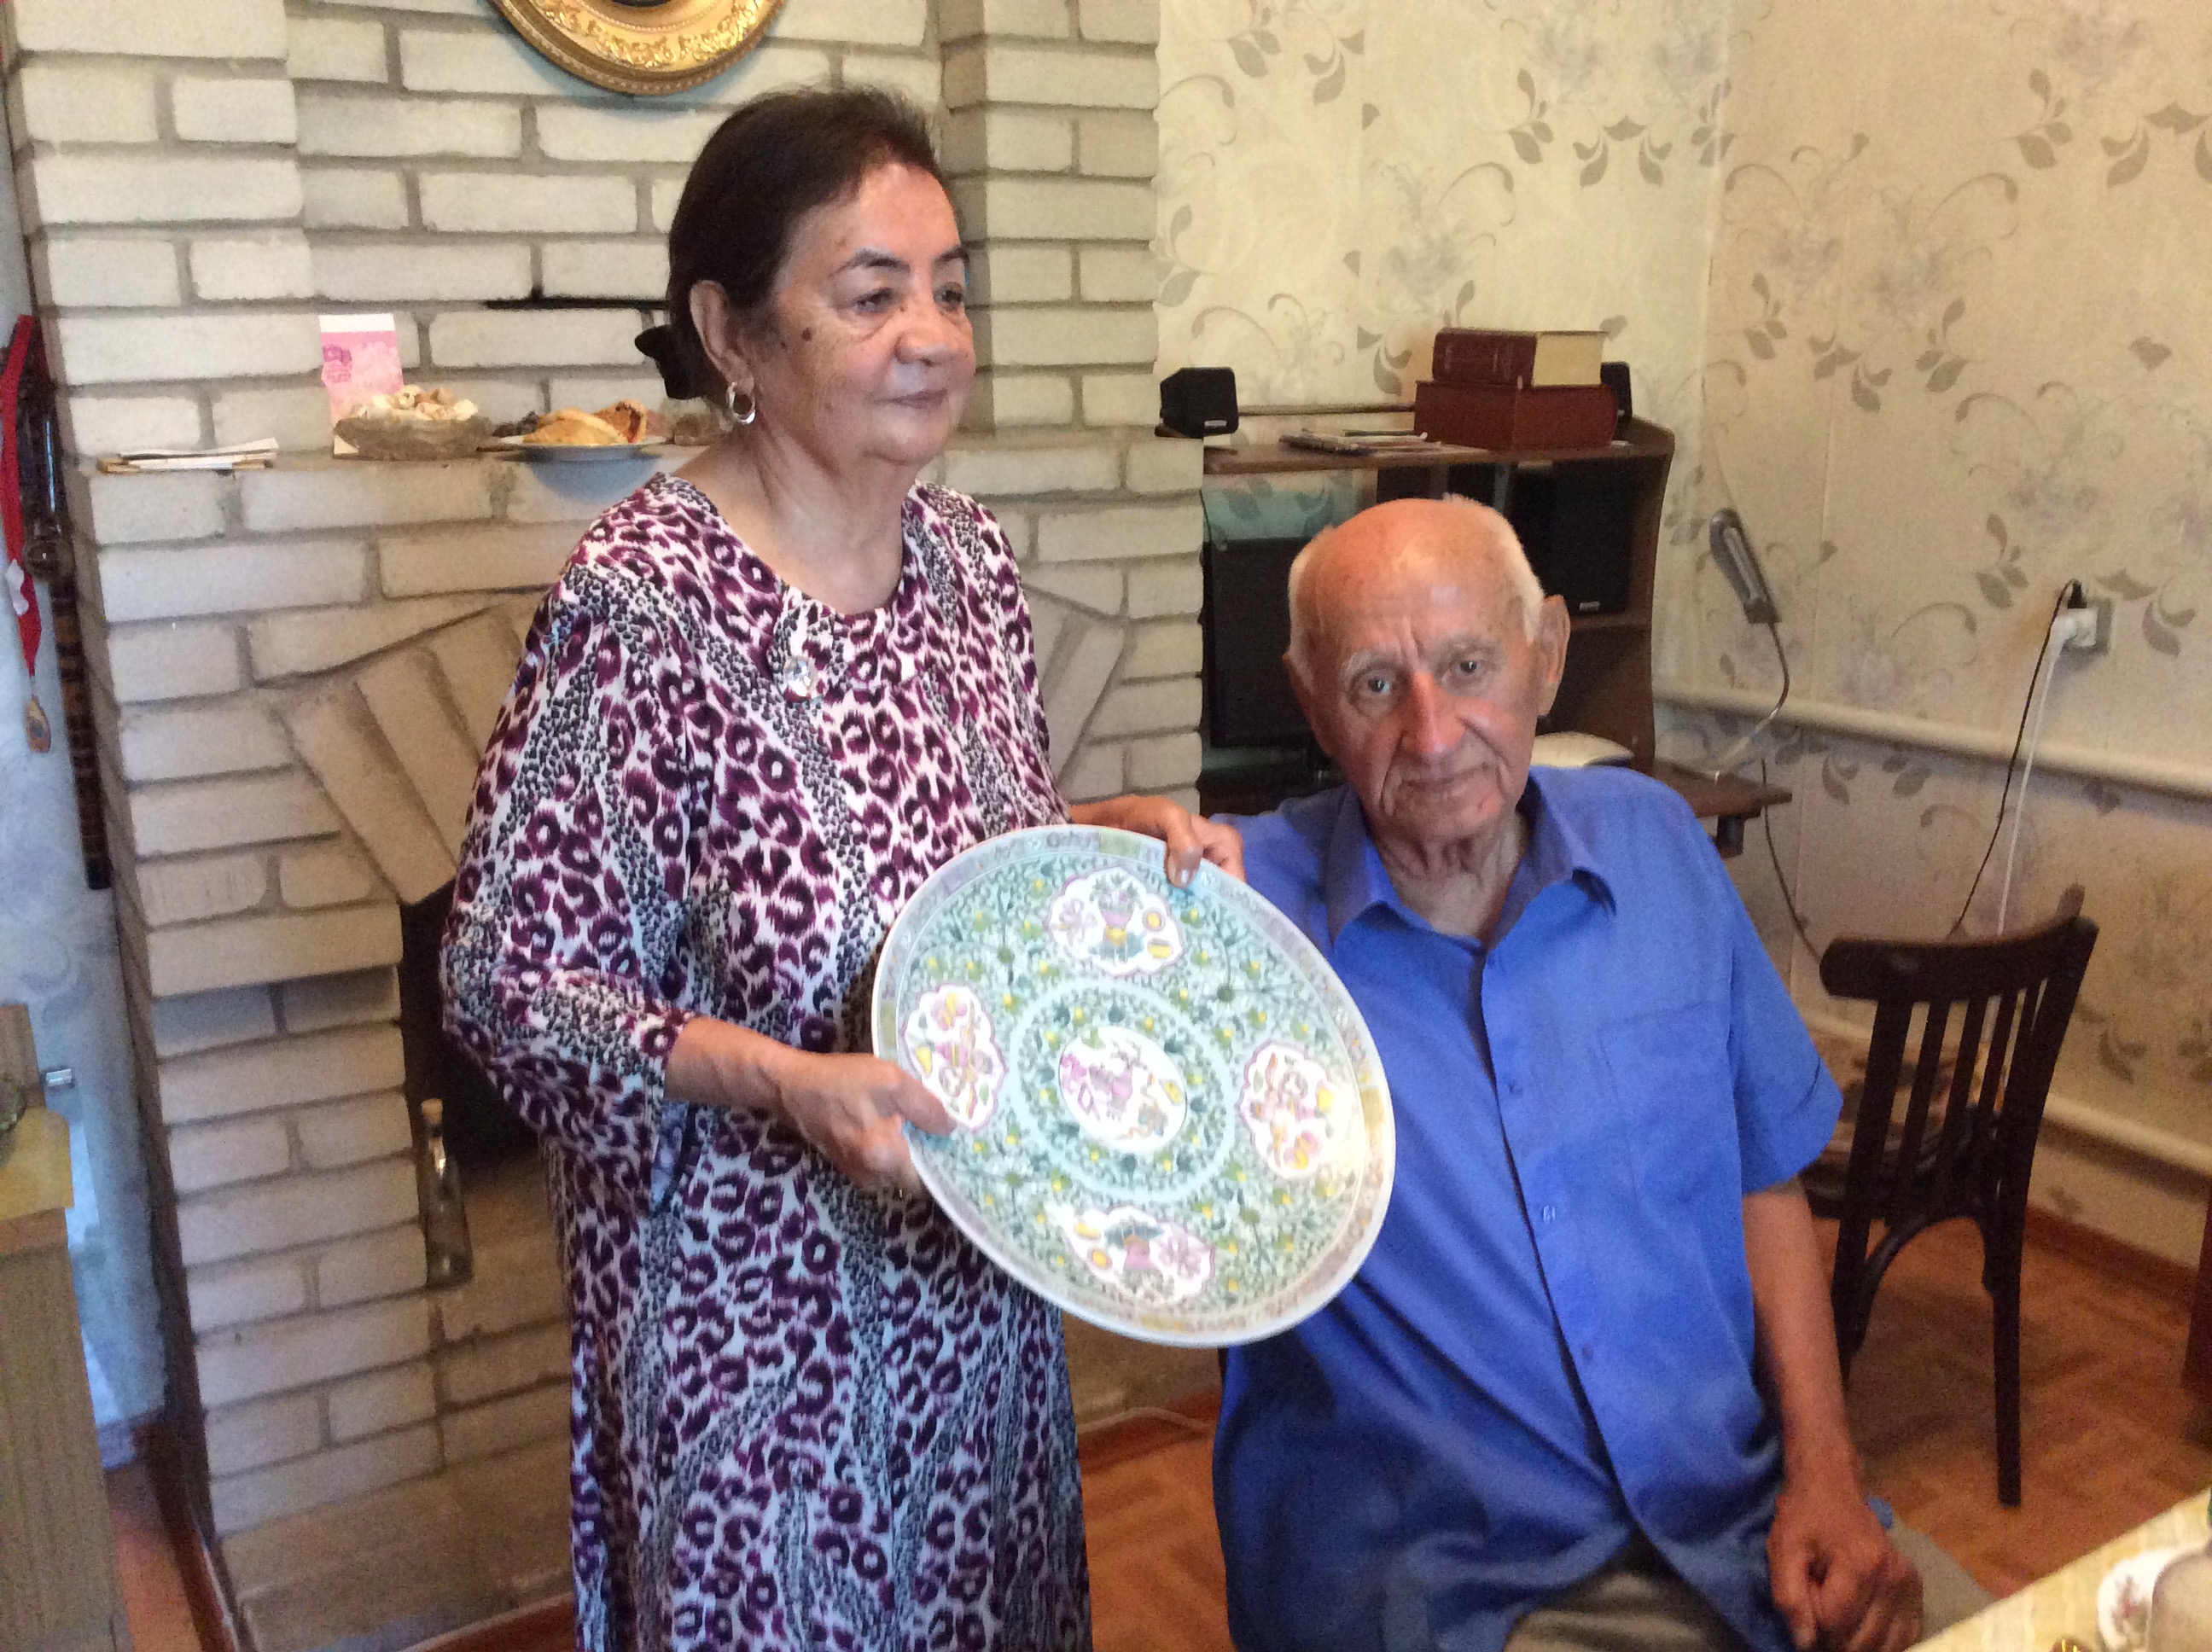 A Uyghur couple poses with a plate they received for their wedding.